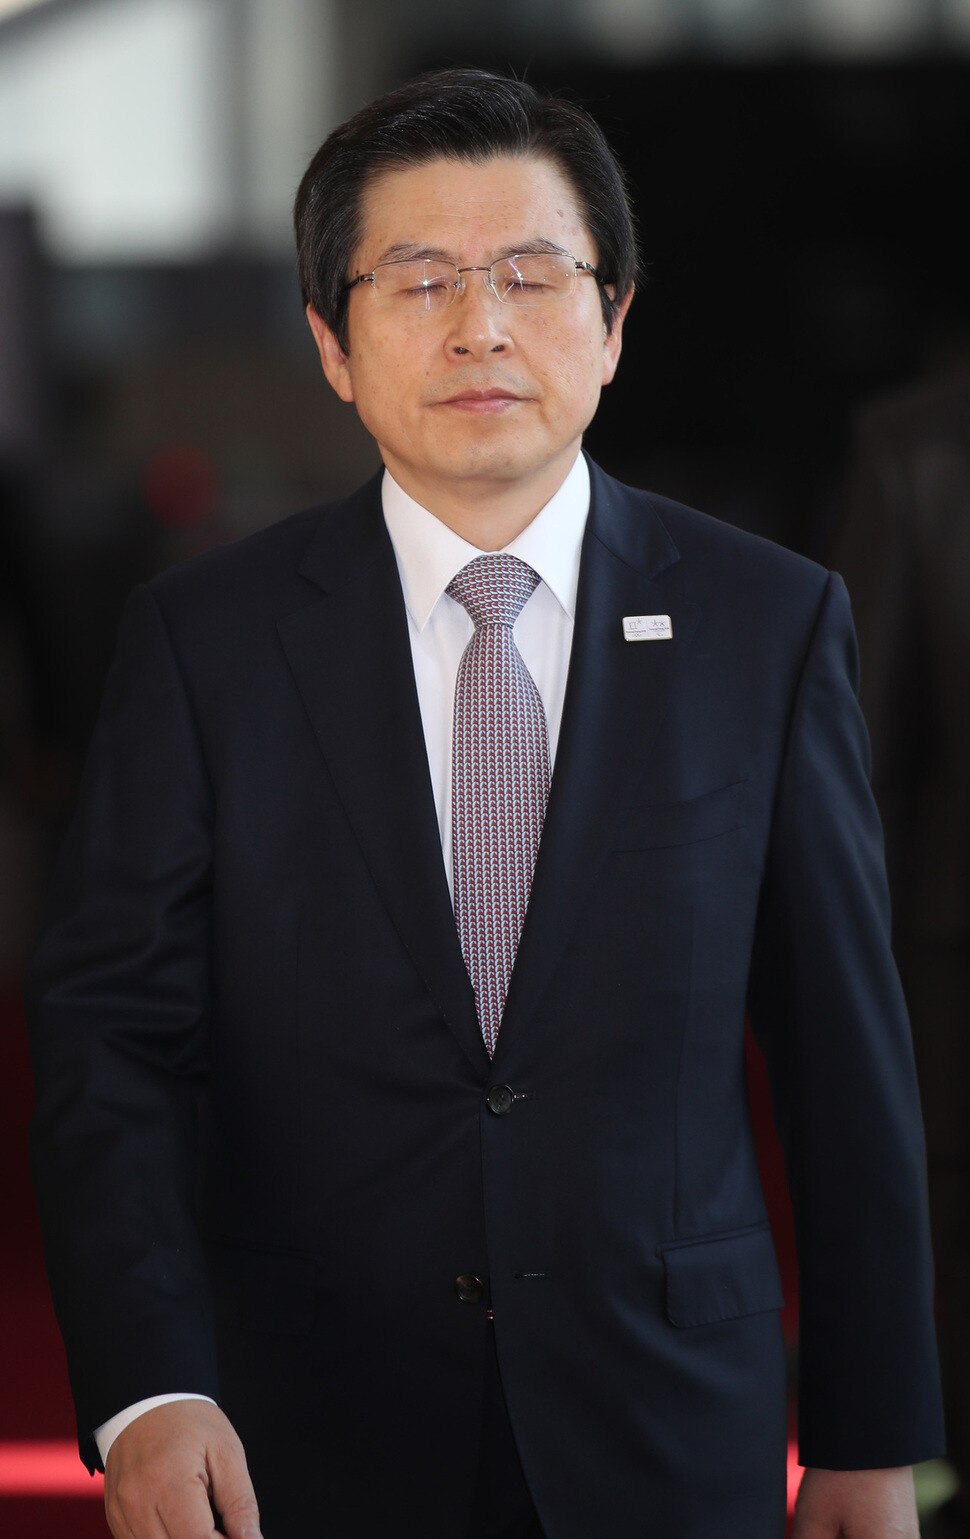 Acting president Hwang Kyo-ahn closes his eyes as he arrives at the Central Government Complex in Seoul